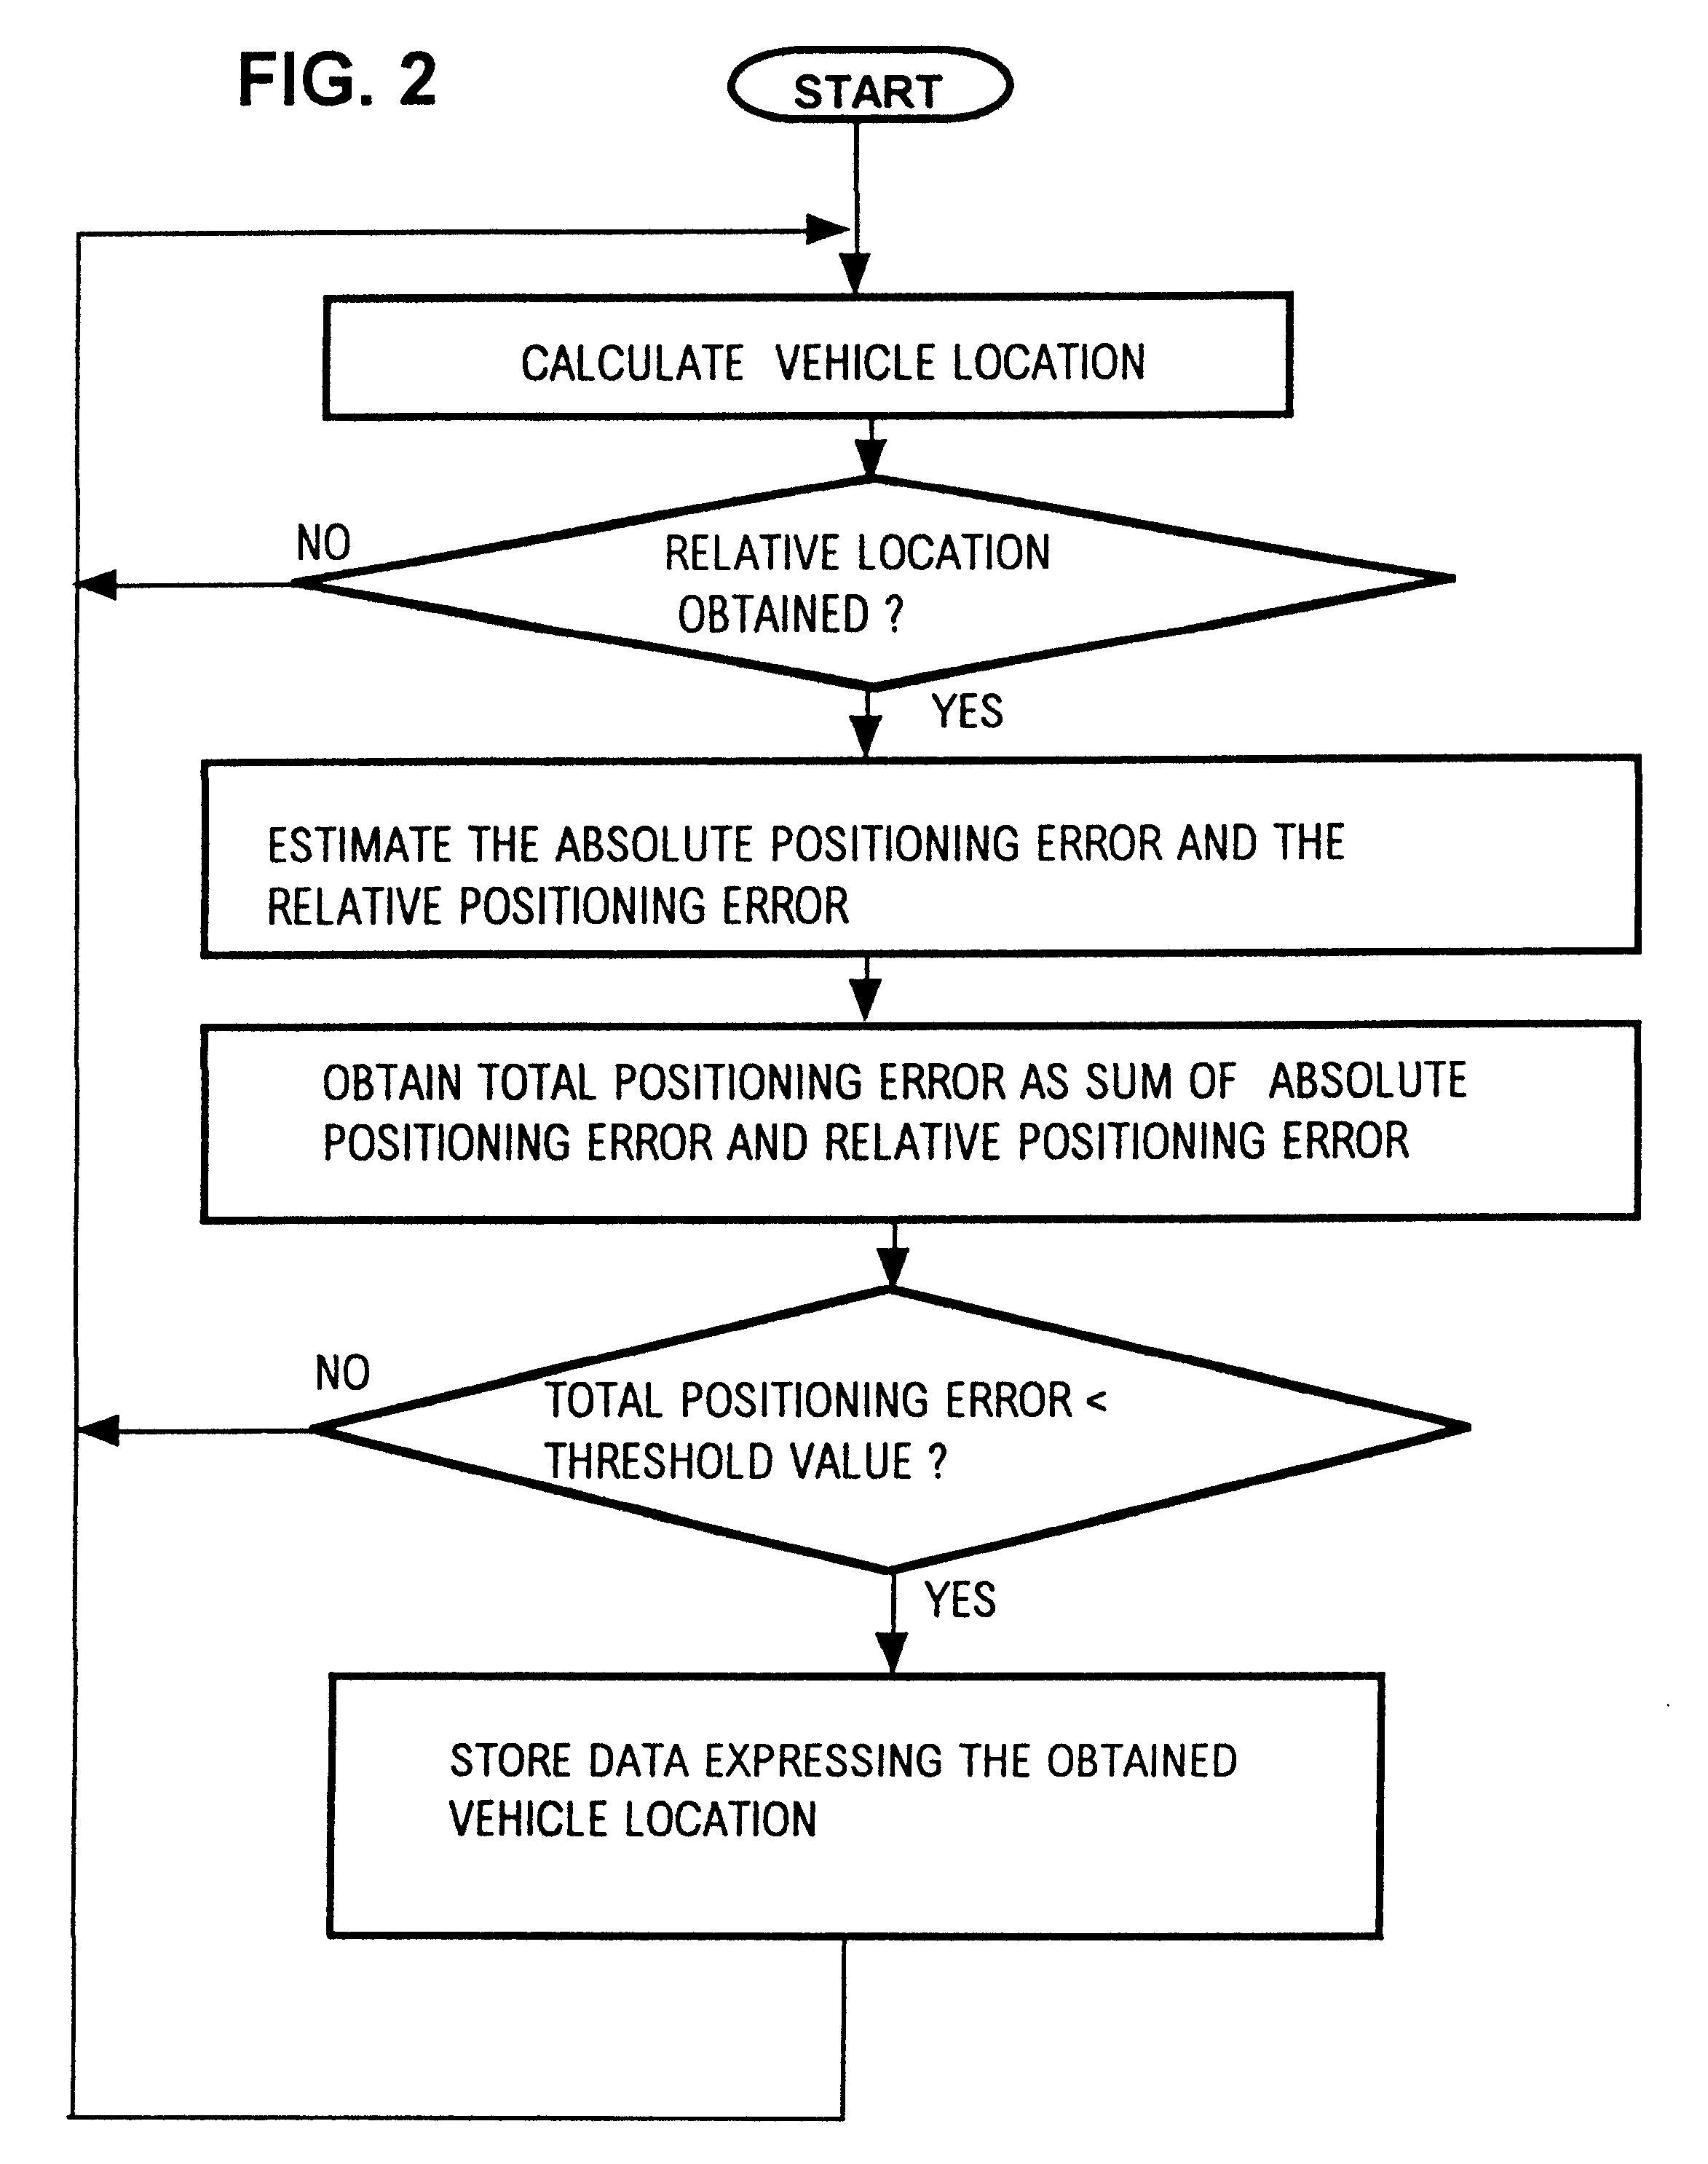 Method and apparatus for applying decimation processing to vehicle position data based upon data accuracy estimation